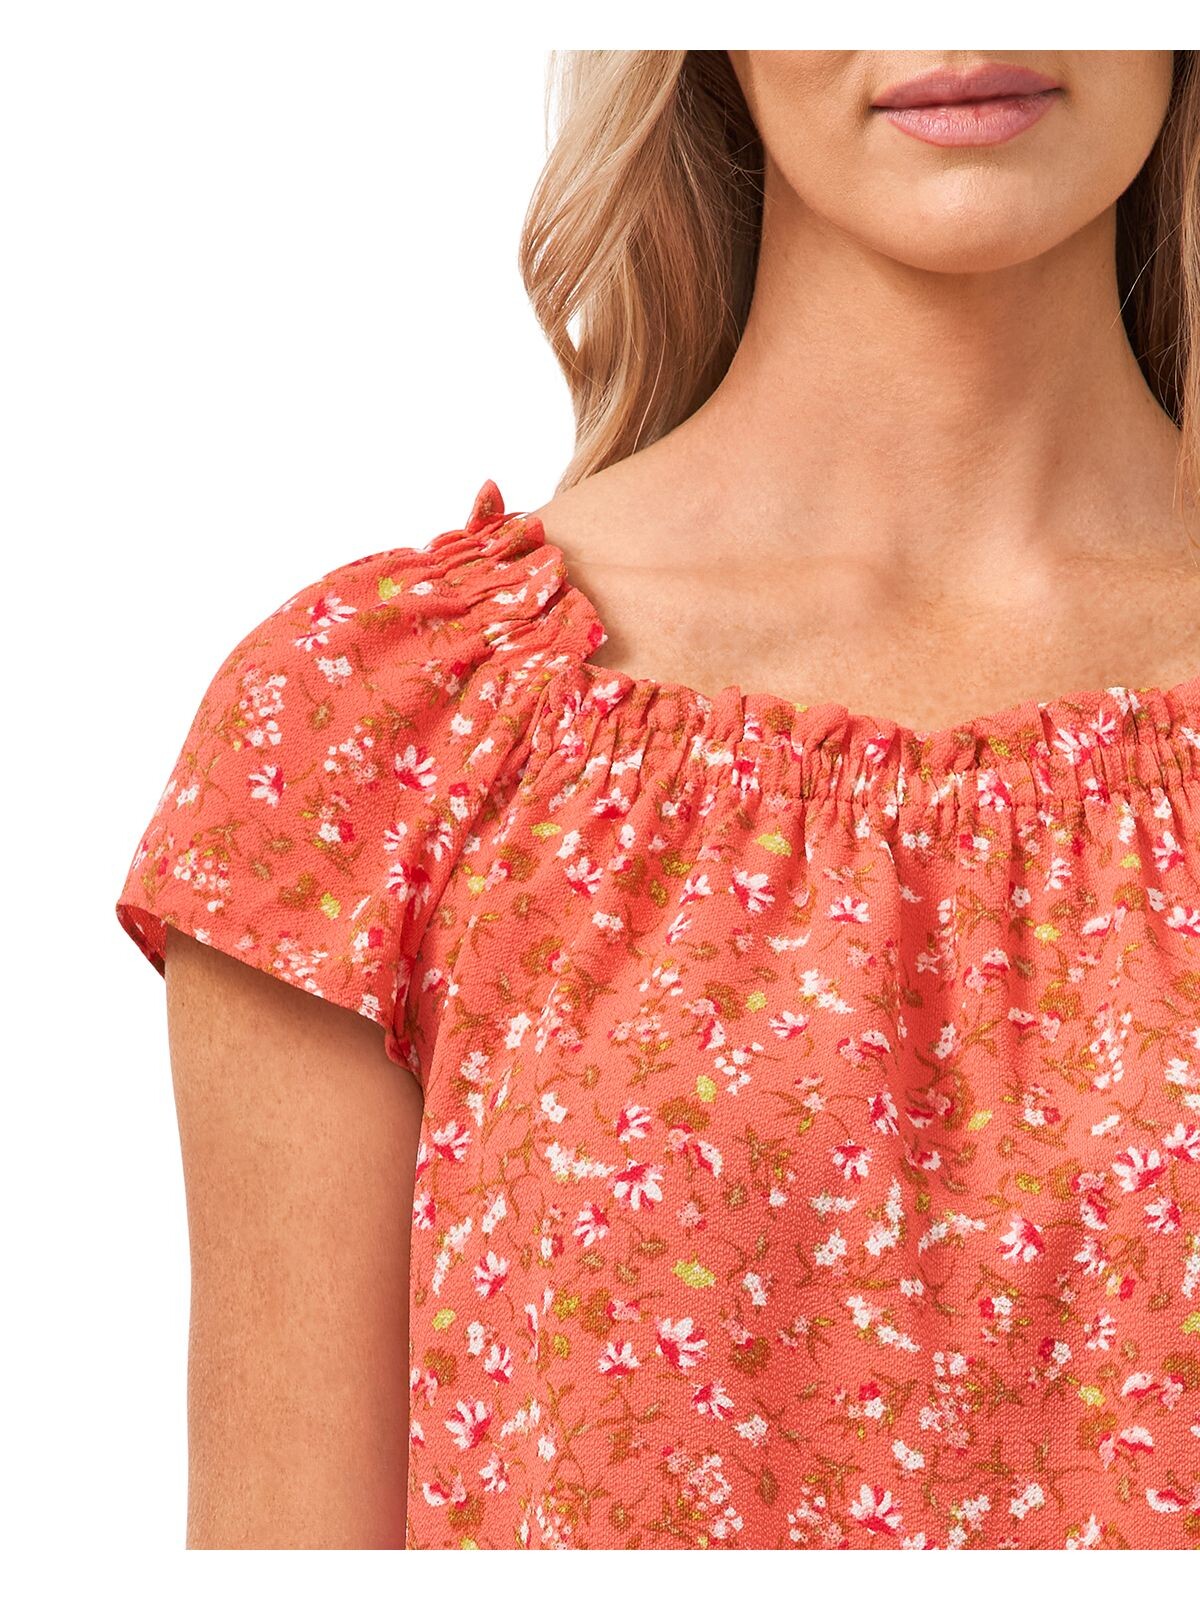 CECE Womens Coral Stretch Ruffled Convertible Floral Short Sleeve Off Shoulder Blouse XS